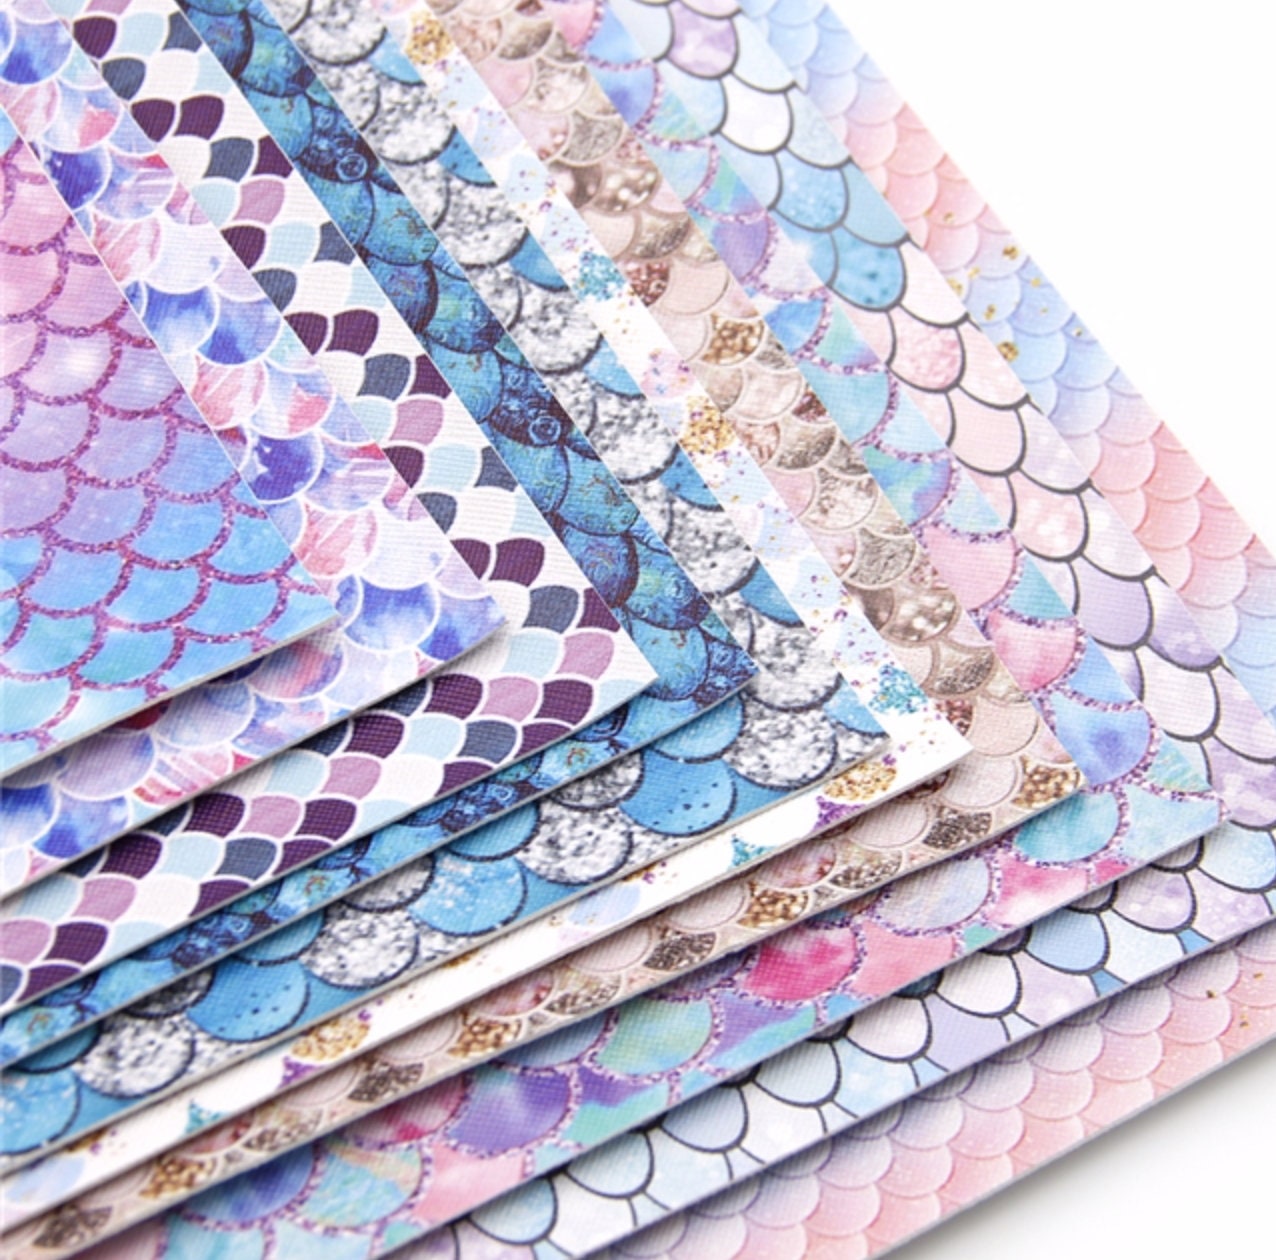 Mermaid/Fish scales pattern faux leather sheets great for bows and earrings TheFabricDude